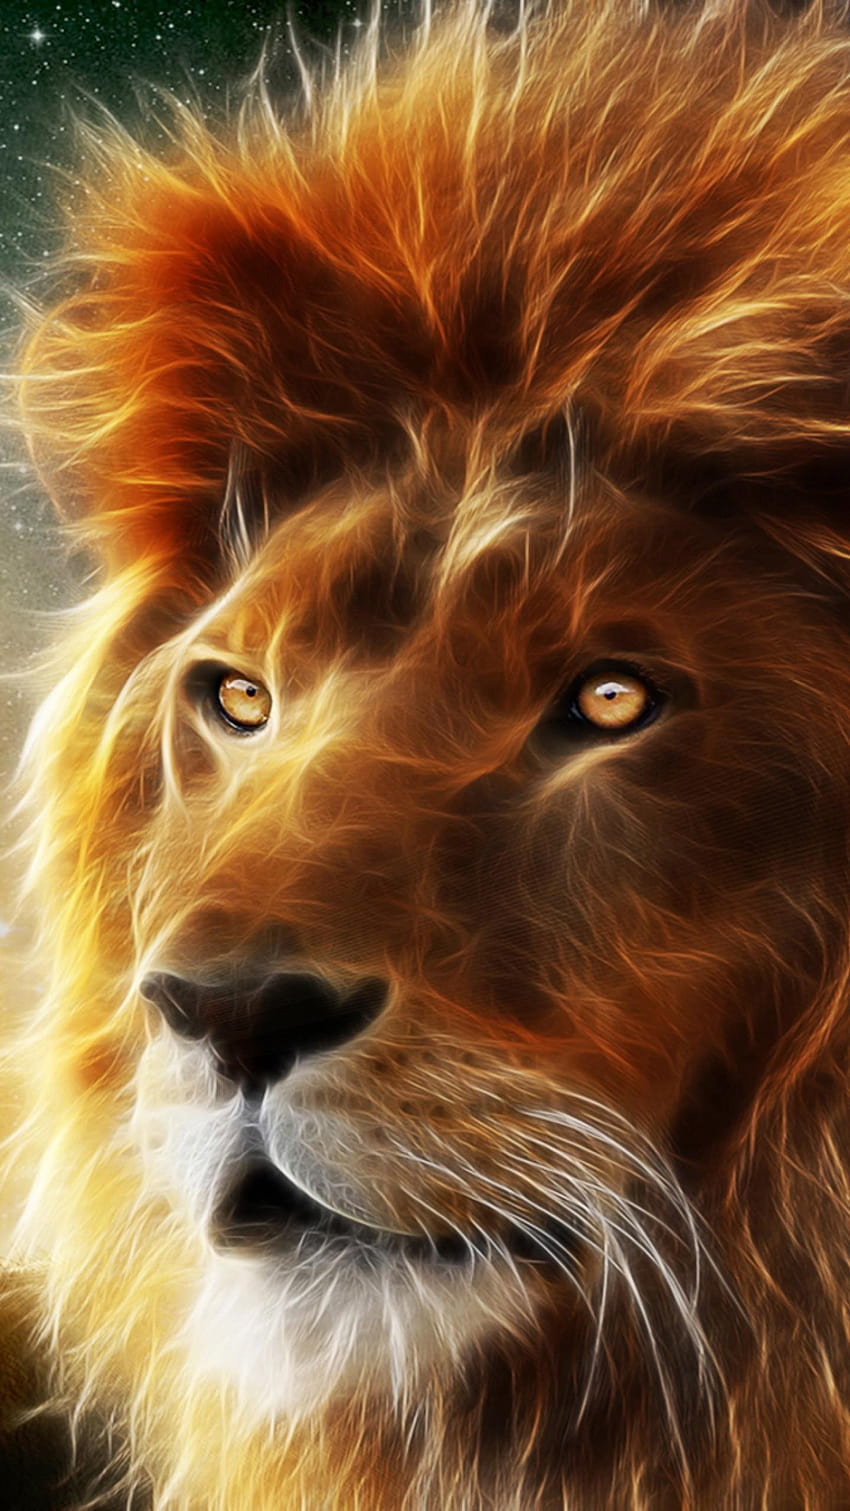 Lion iPhone, angry lion face mobile HD phone wallpaper